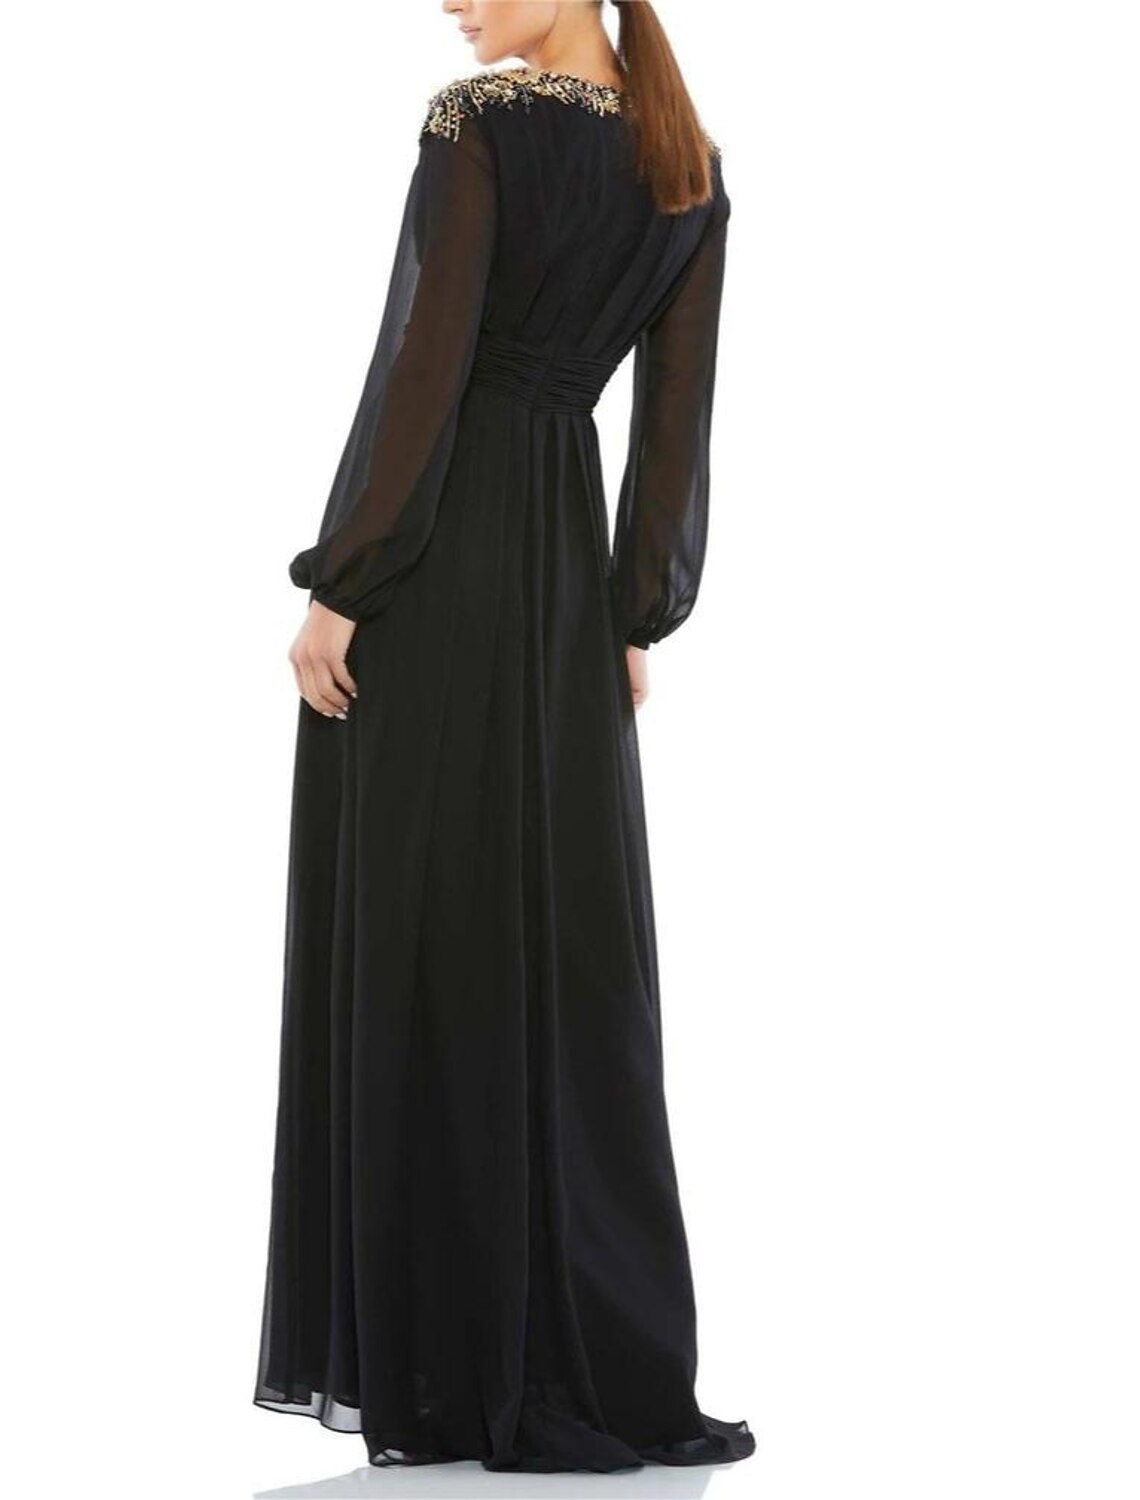 A-Line Mother of the Bride Dress Wedding Guest Vintage Elegant V Neck Knee Length Stretch Chiffon Long Sleeve with Crystals Beading